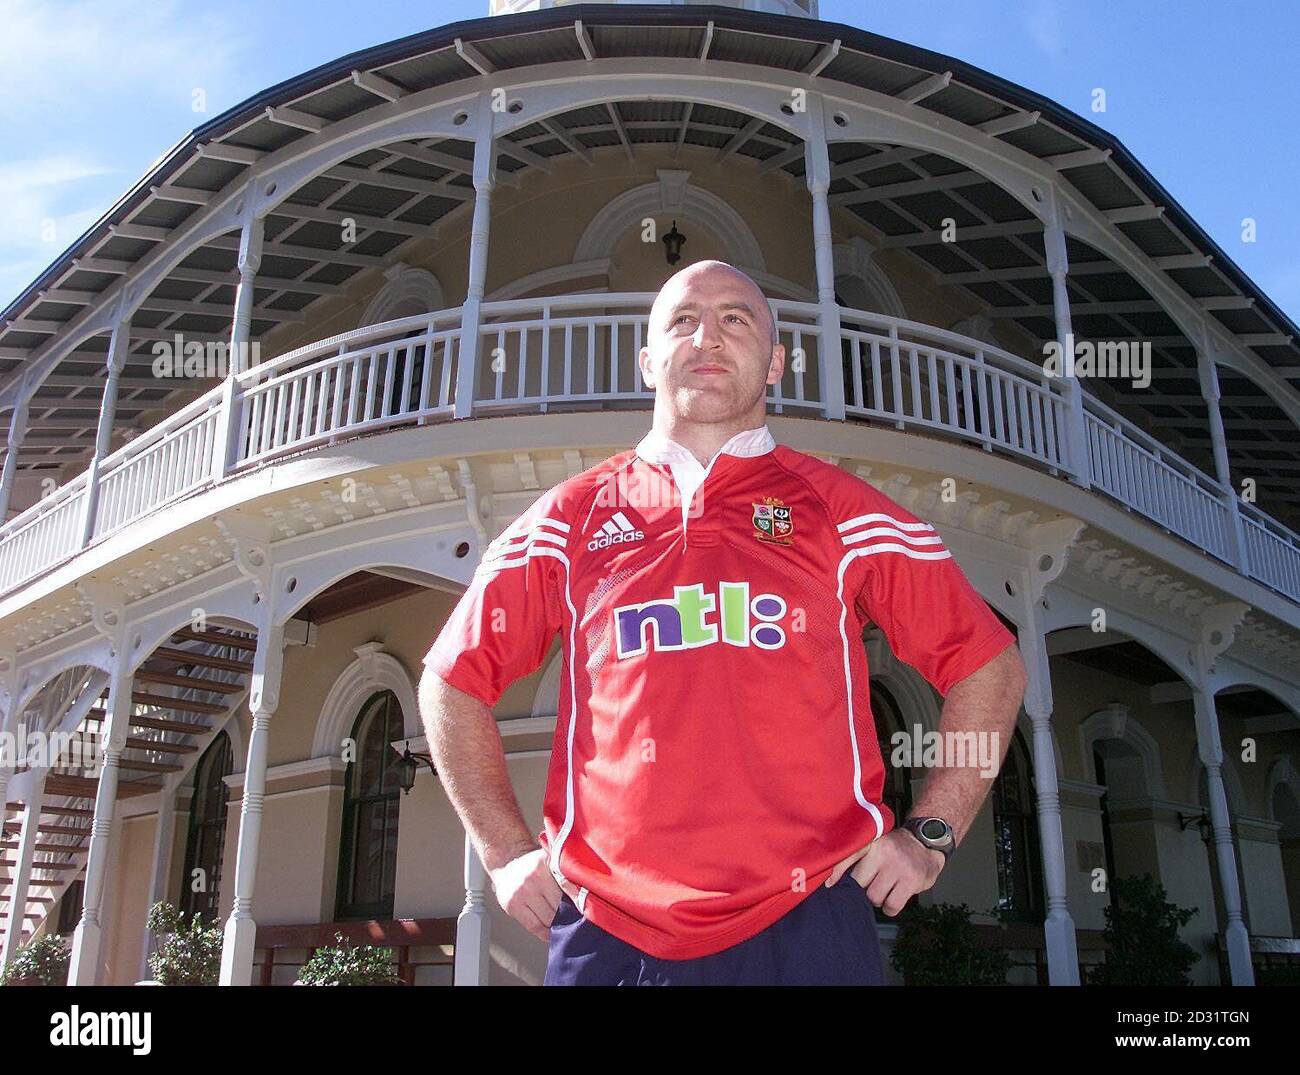 Keith wood rugby and images - Page 3 - Alamy